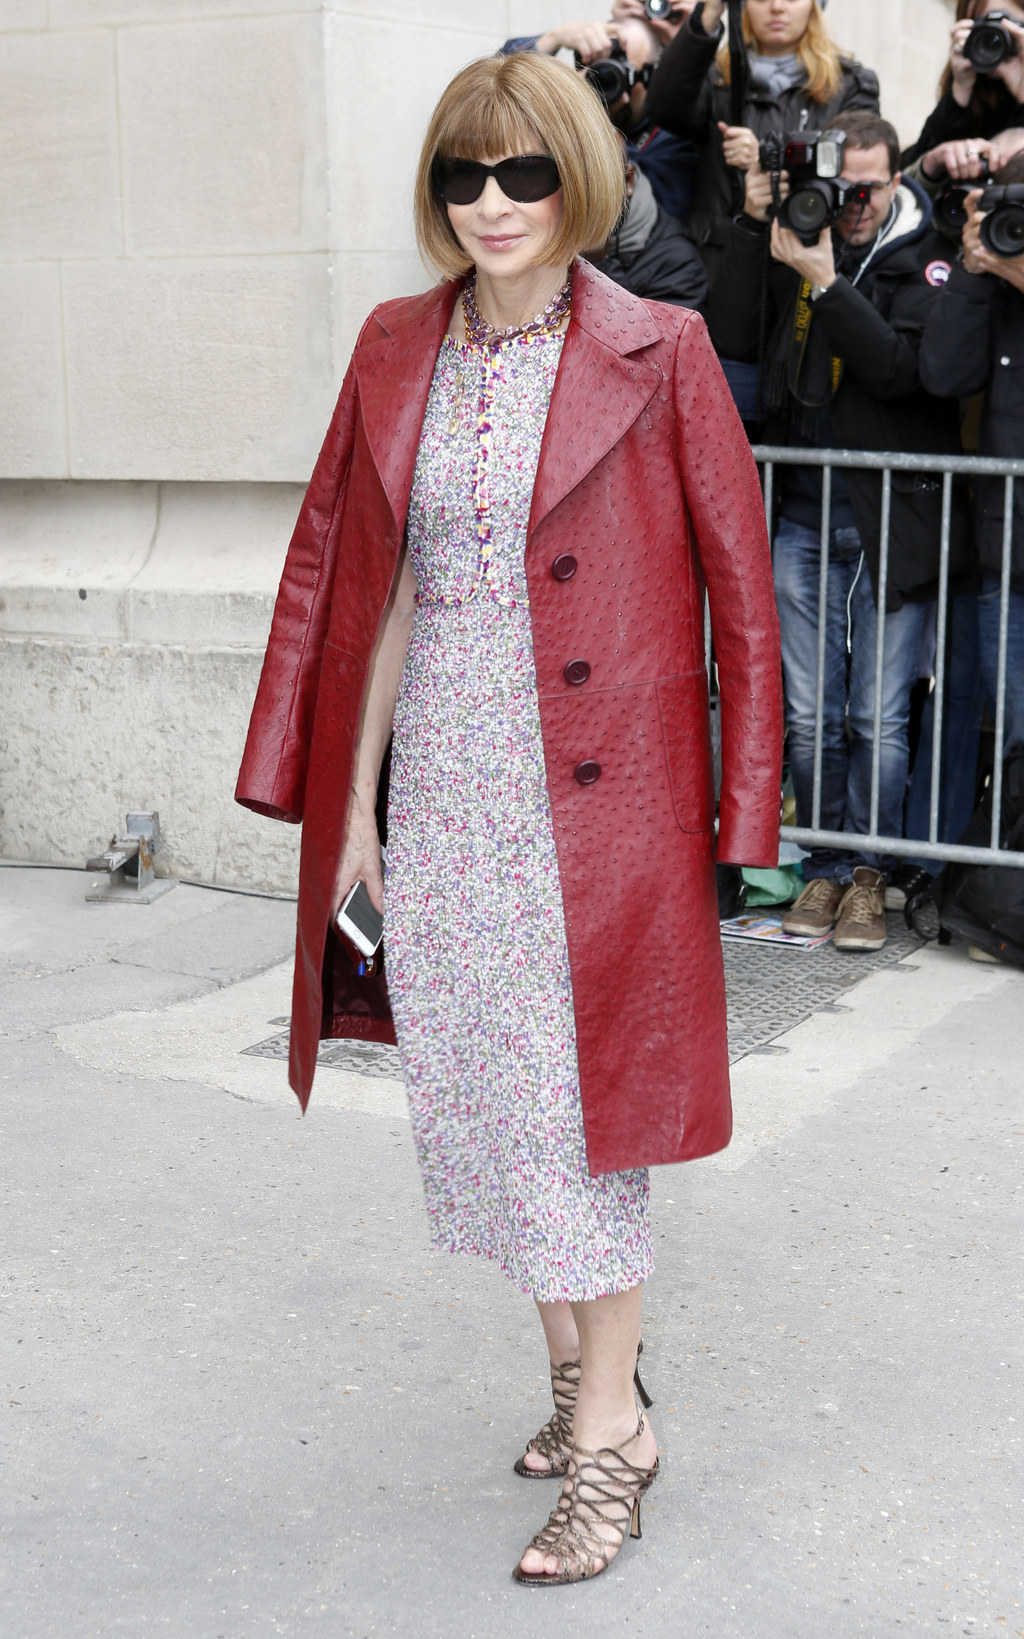 Anna Wintour At The Chanel Show In Paris